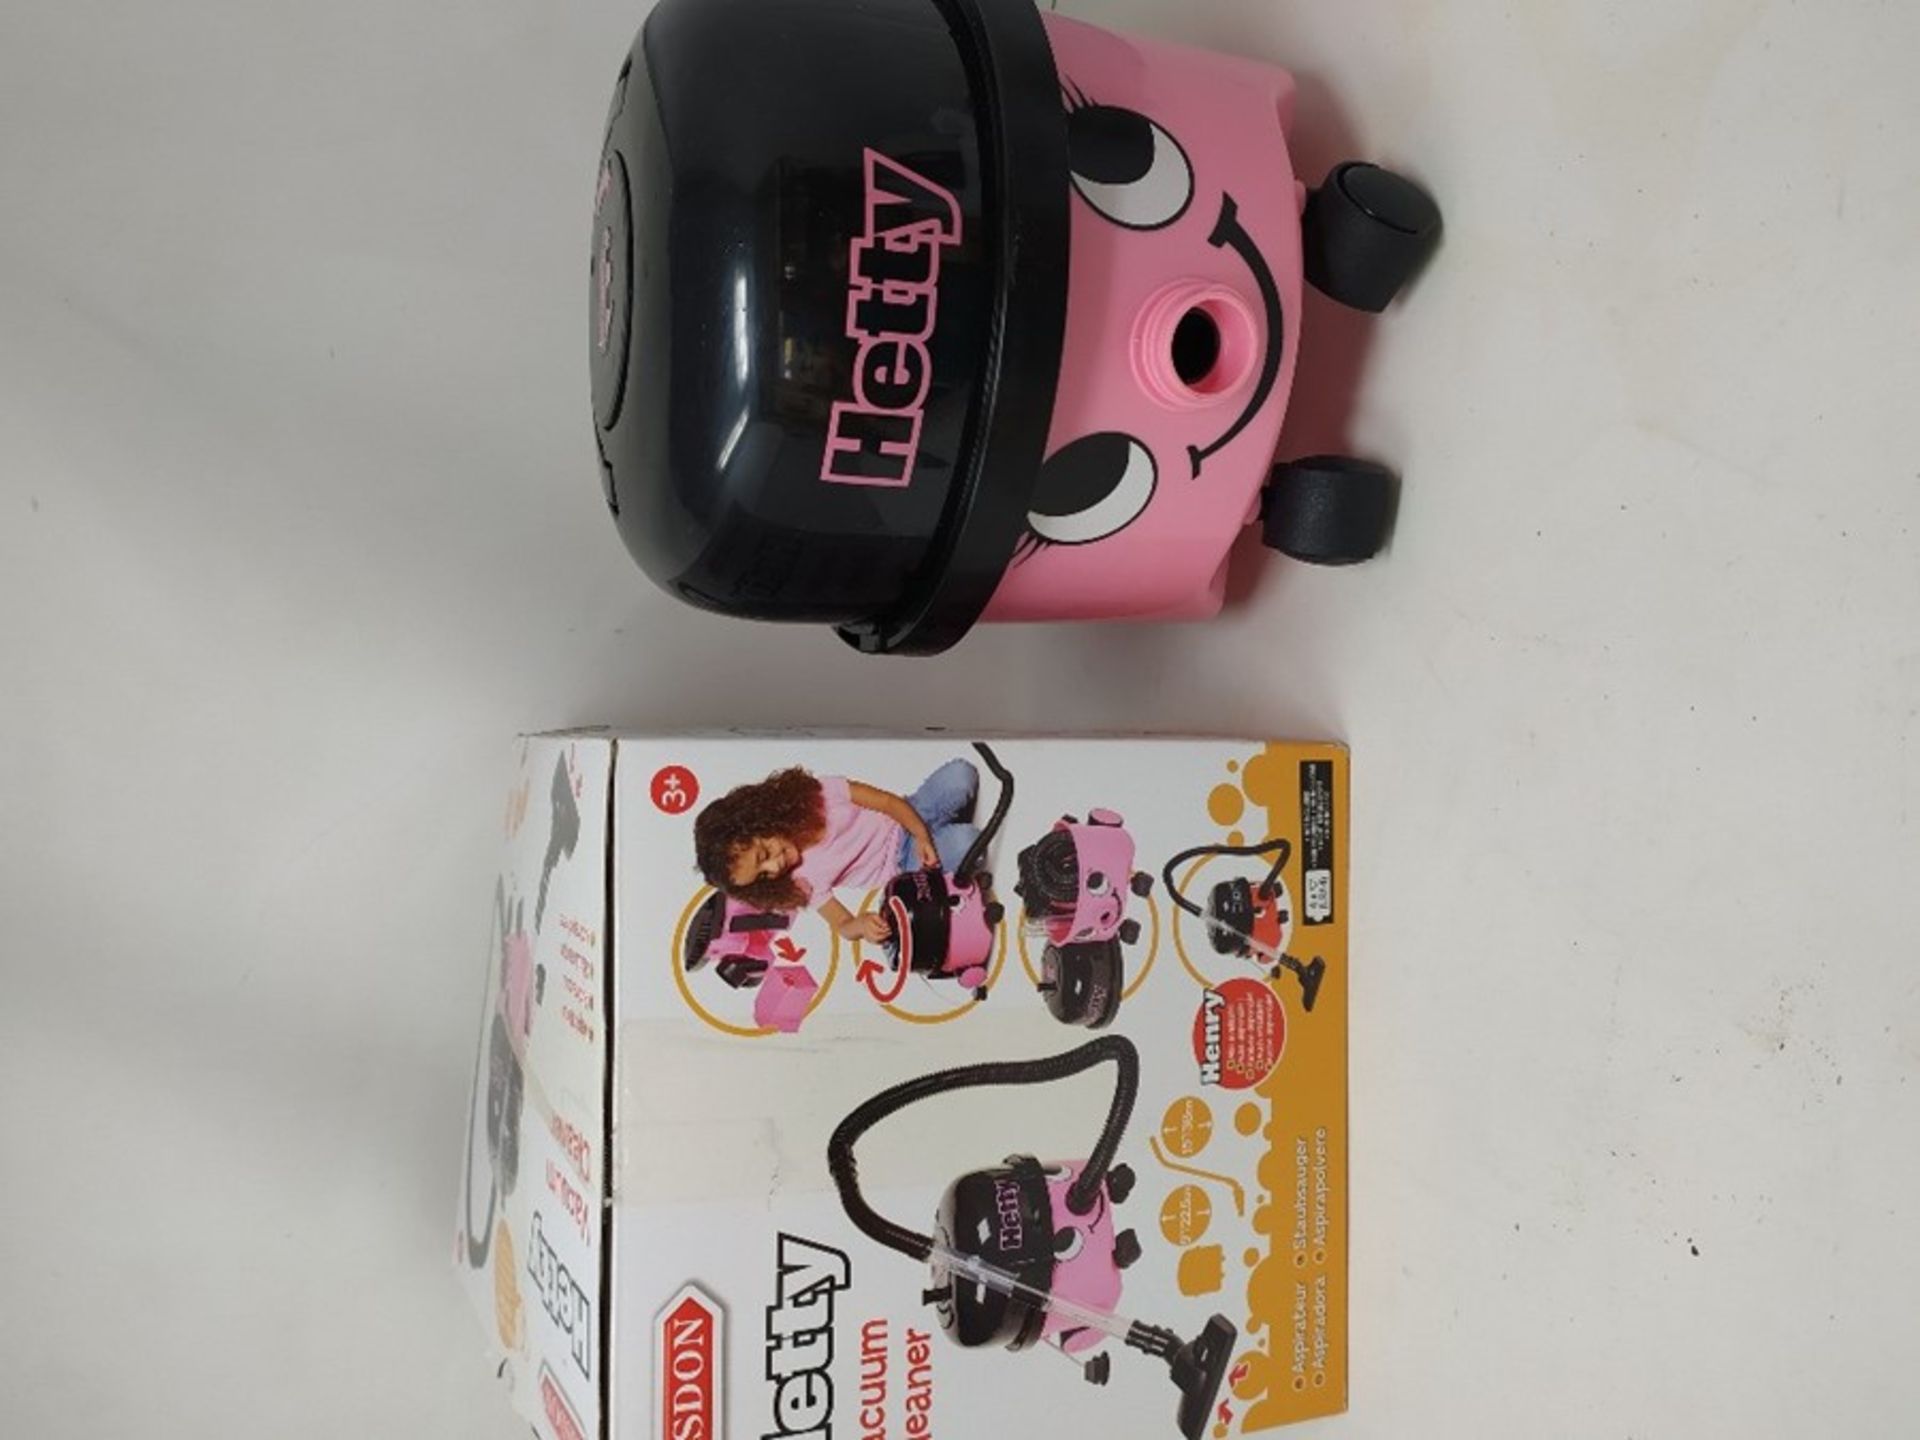 [INCOMPLETE] Casdon plc 729 Casdon Hetty Vacuum Cleaner Toy, Pink - Image 2 of 3